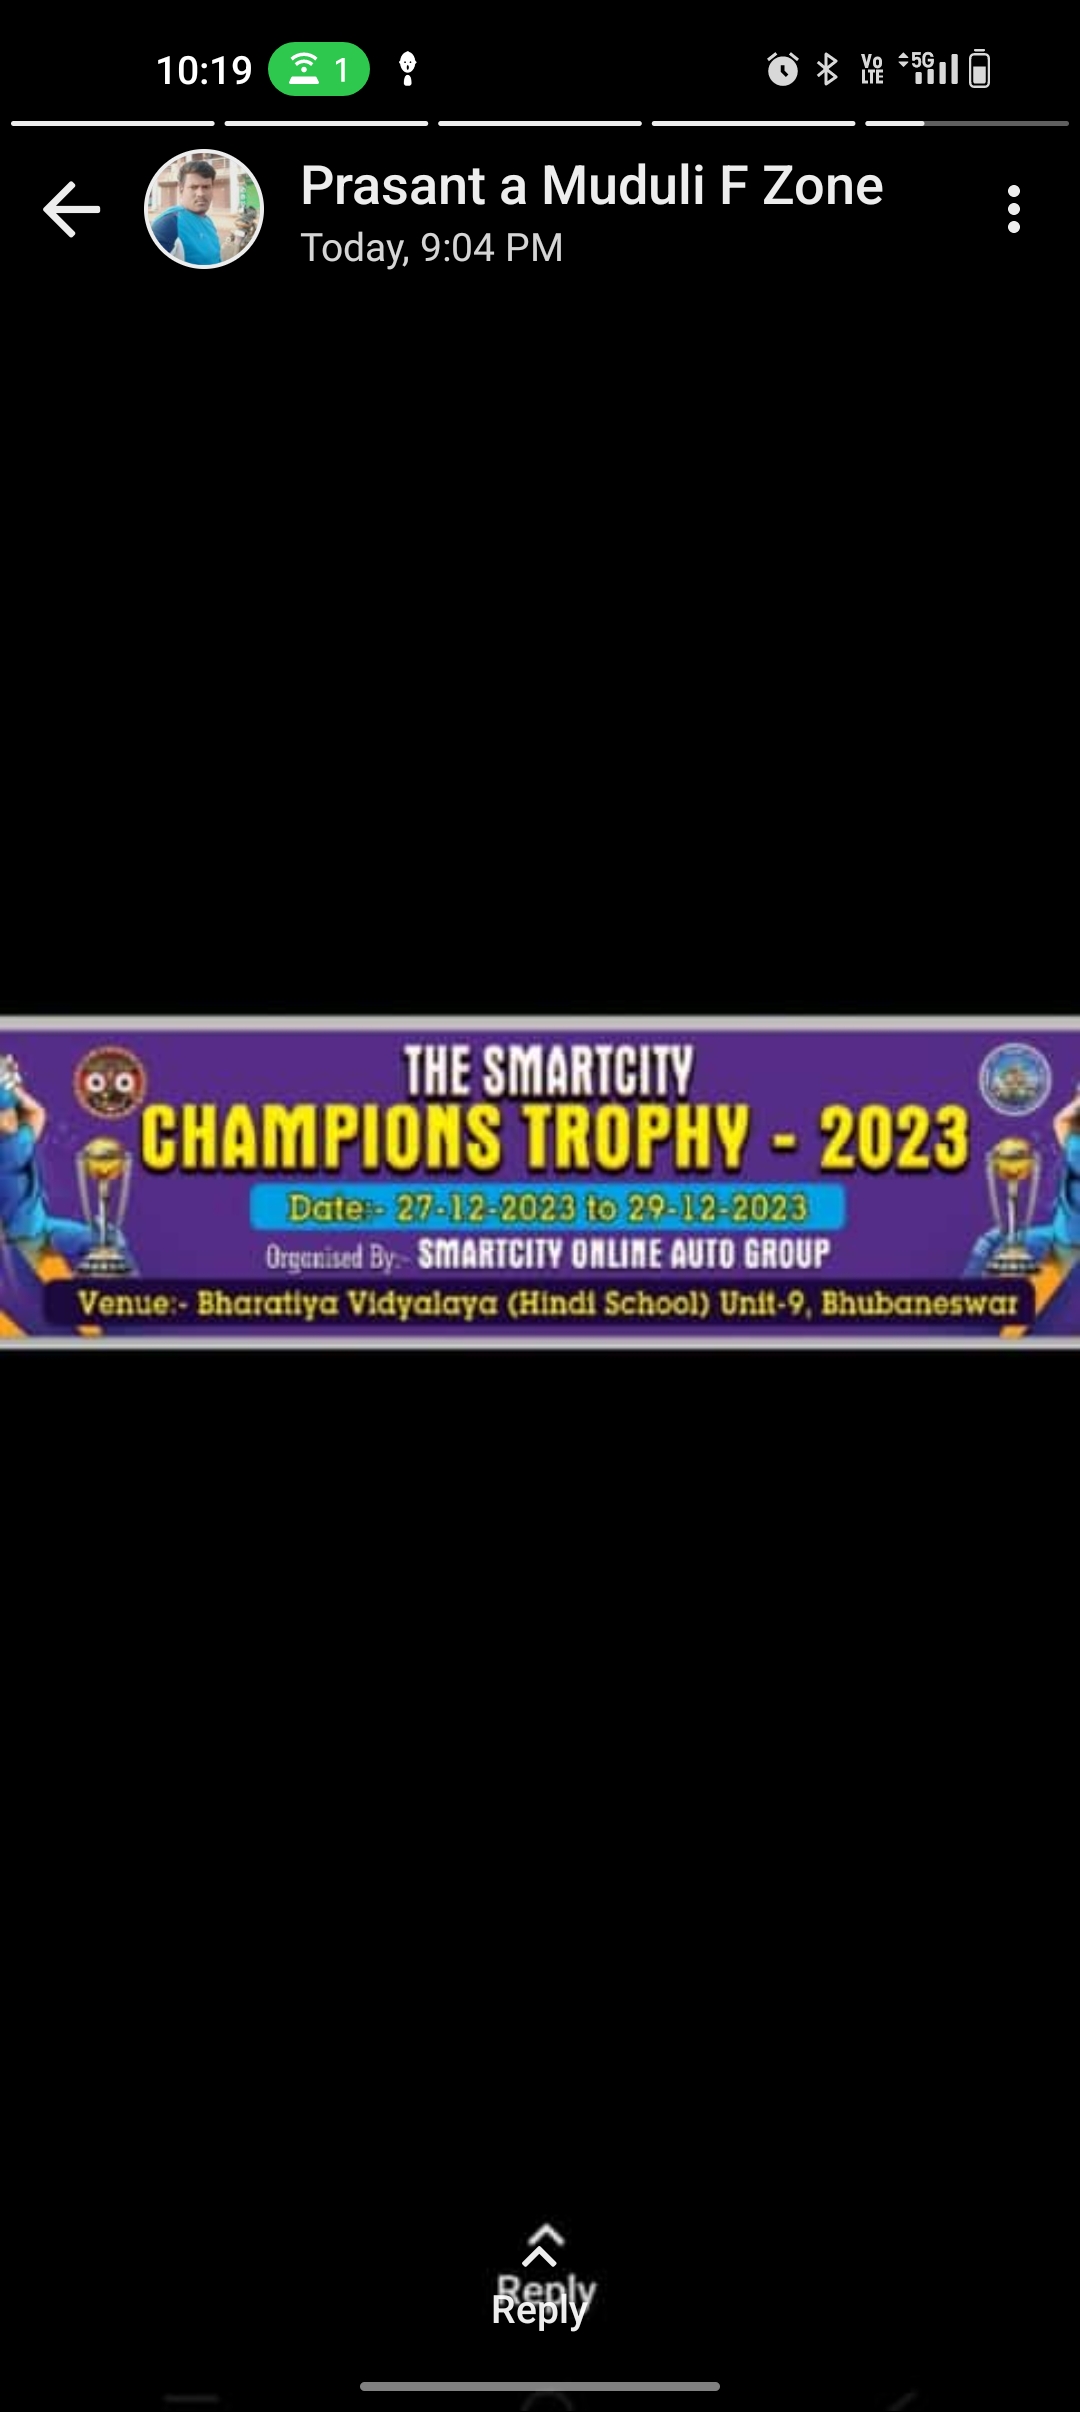 THE SMART CITY Champions Trophy 